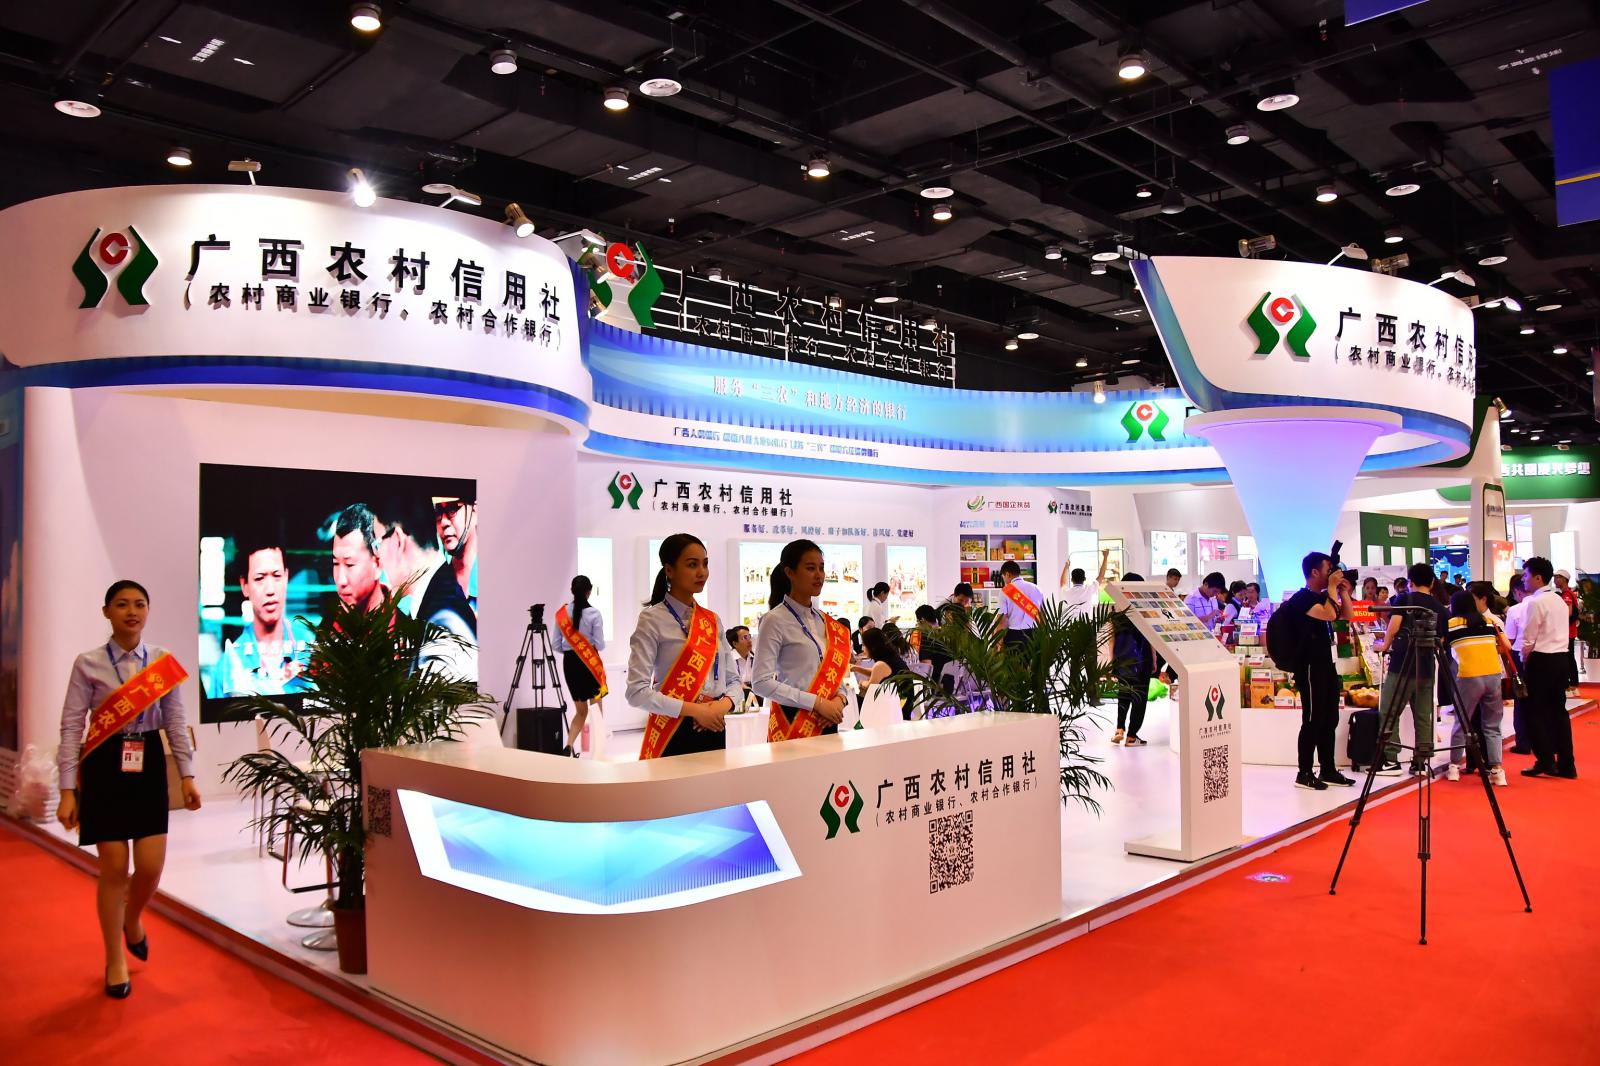 Financial service exhibition in the CAEXPO2